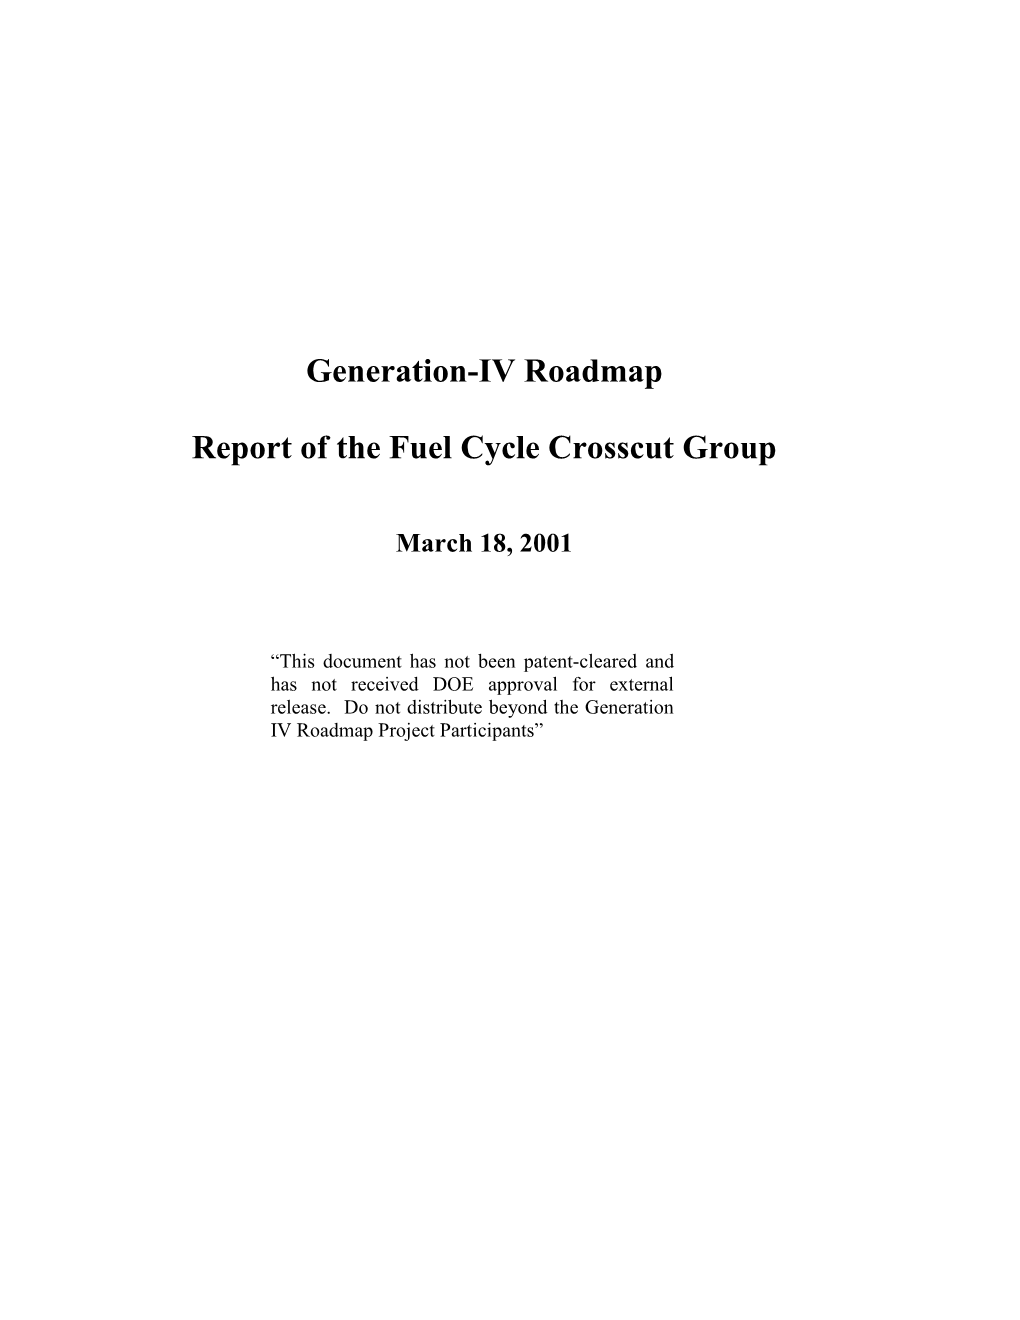 Generation-IV Roadmap Report of the Fuel Cycle Crosscut Group (FCCG)